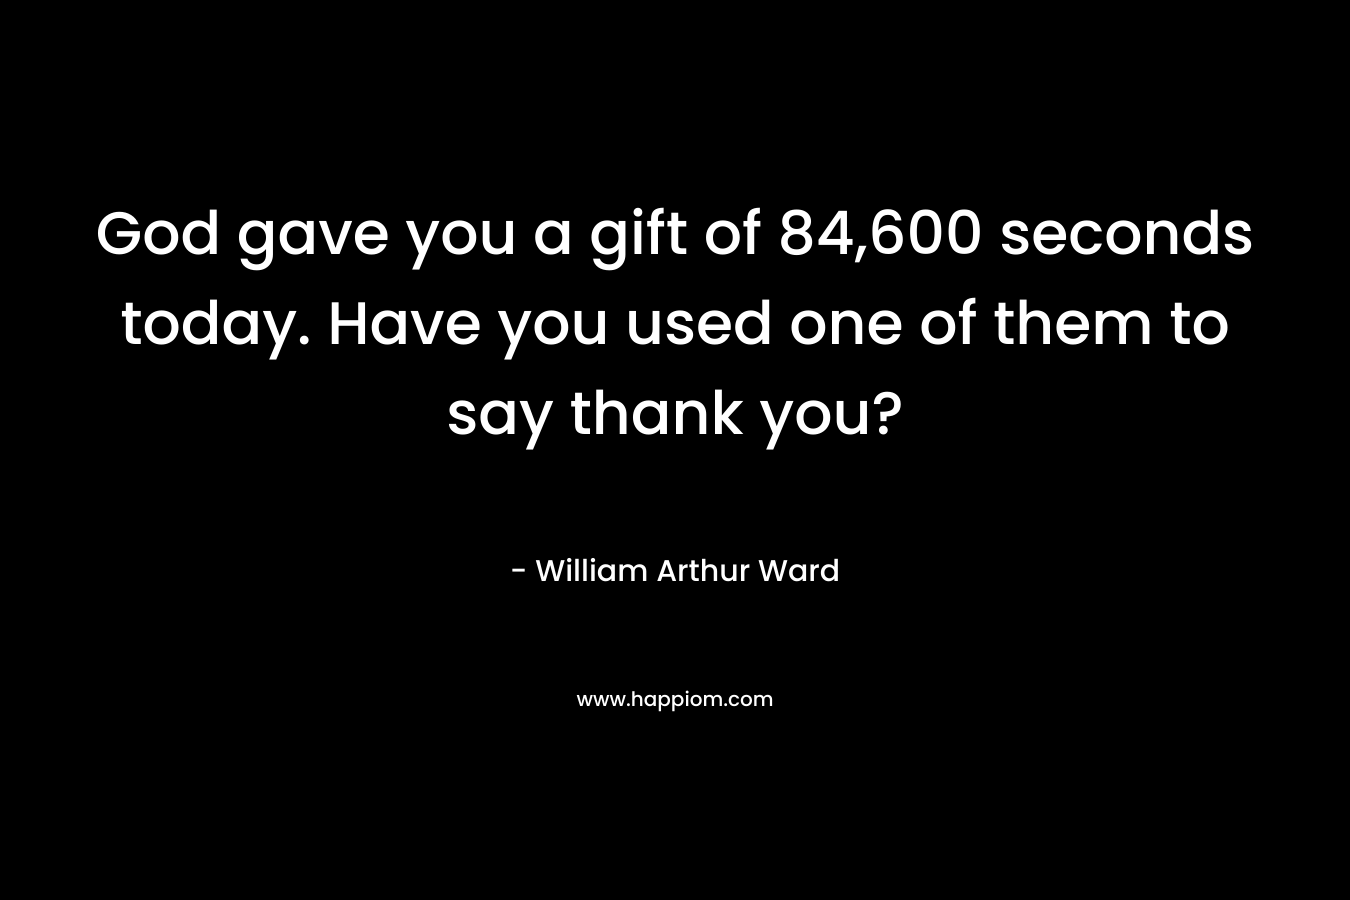 God gave you a gift of 84,600 seconds today. Have you used one of them to say thank you?